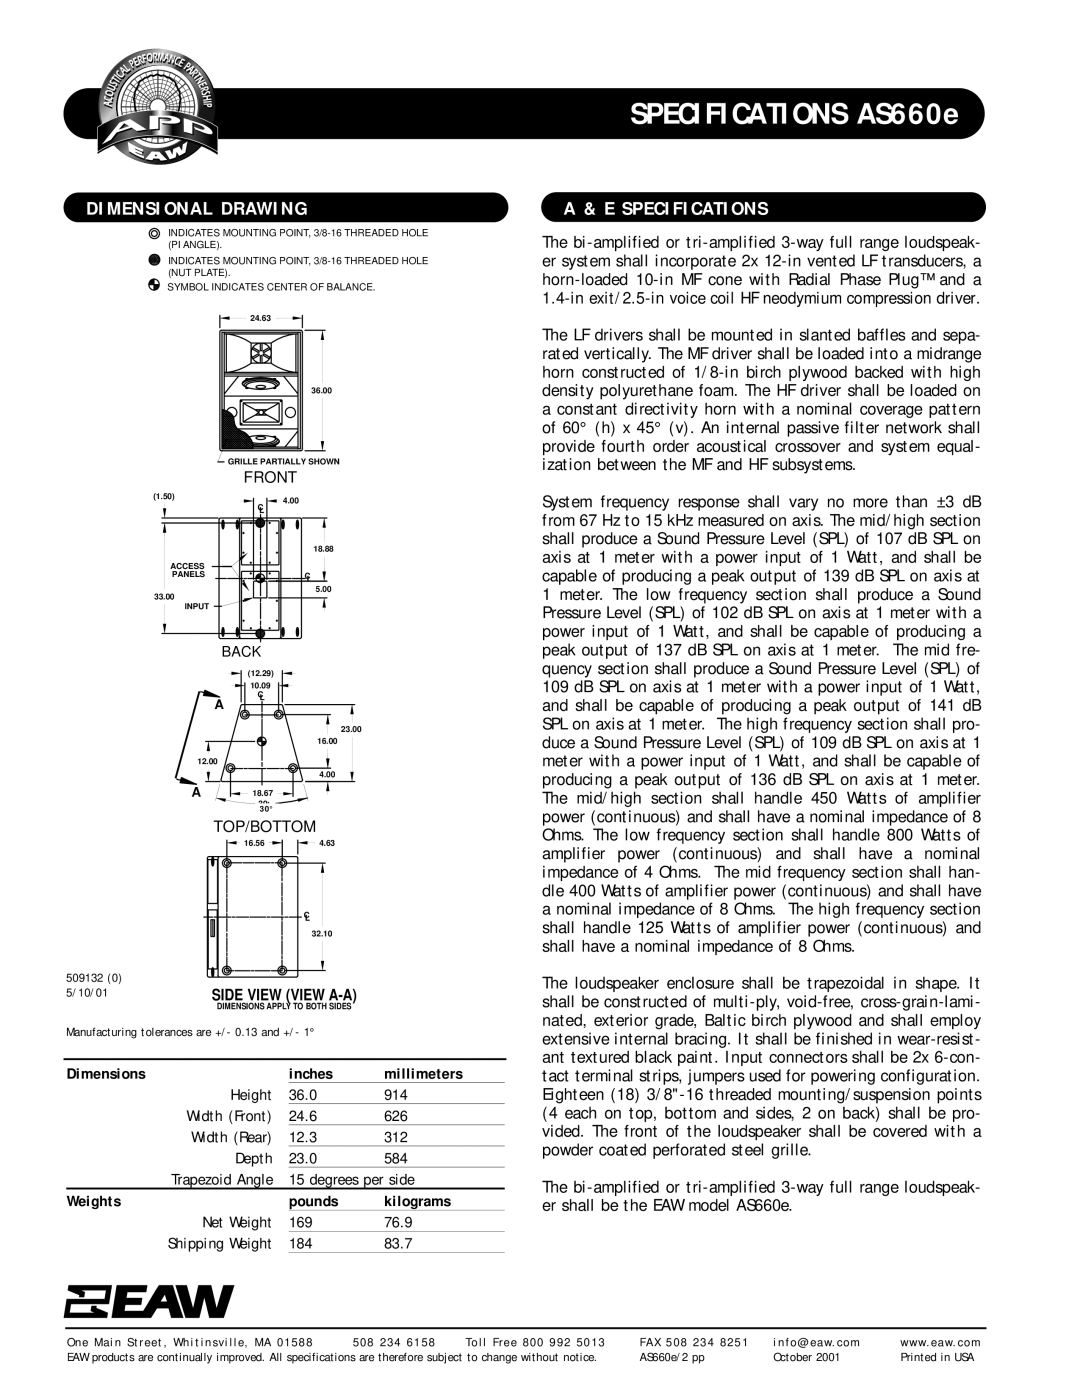 EAW AS660e specifications Dimensional Drawing, A & E Specifications, Front, Dimensions, inches, Weights, pounds, kilograms 